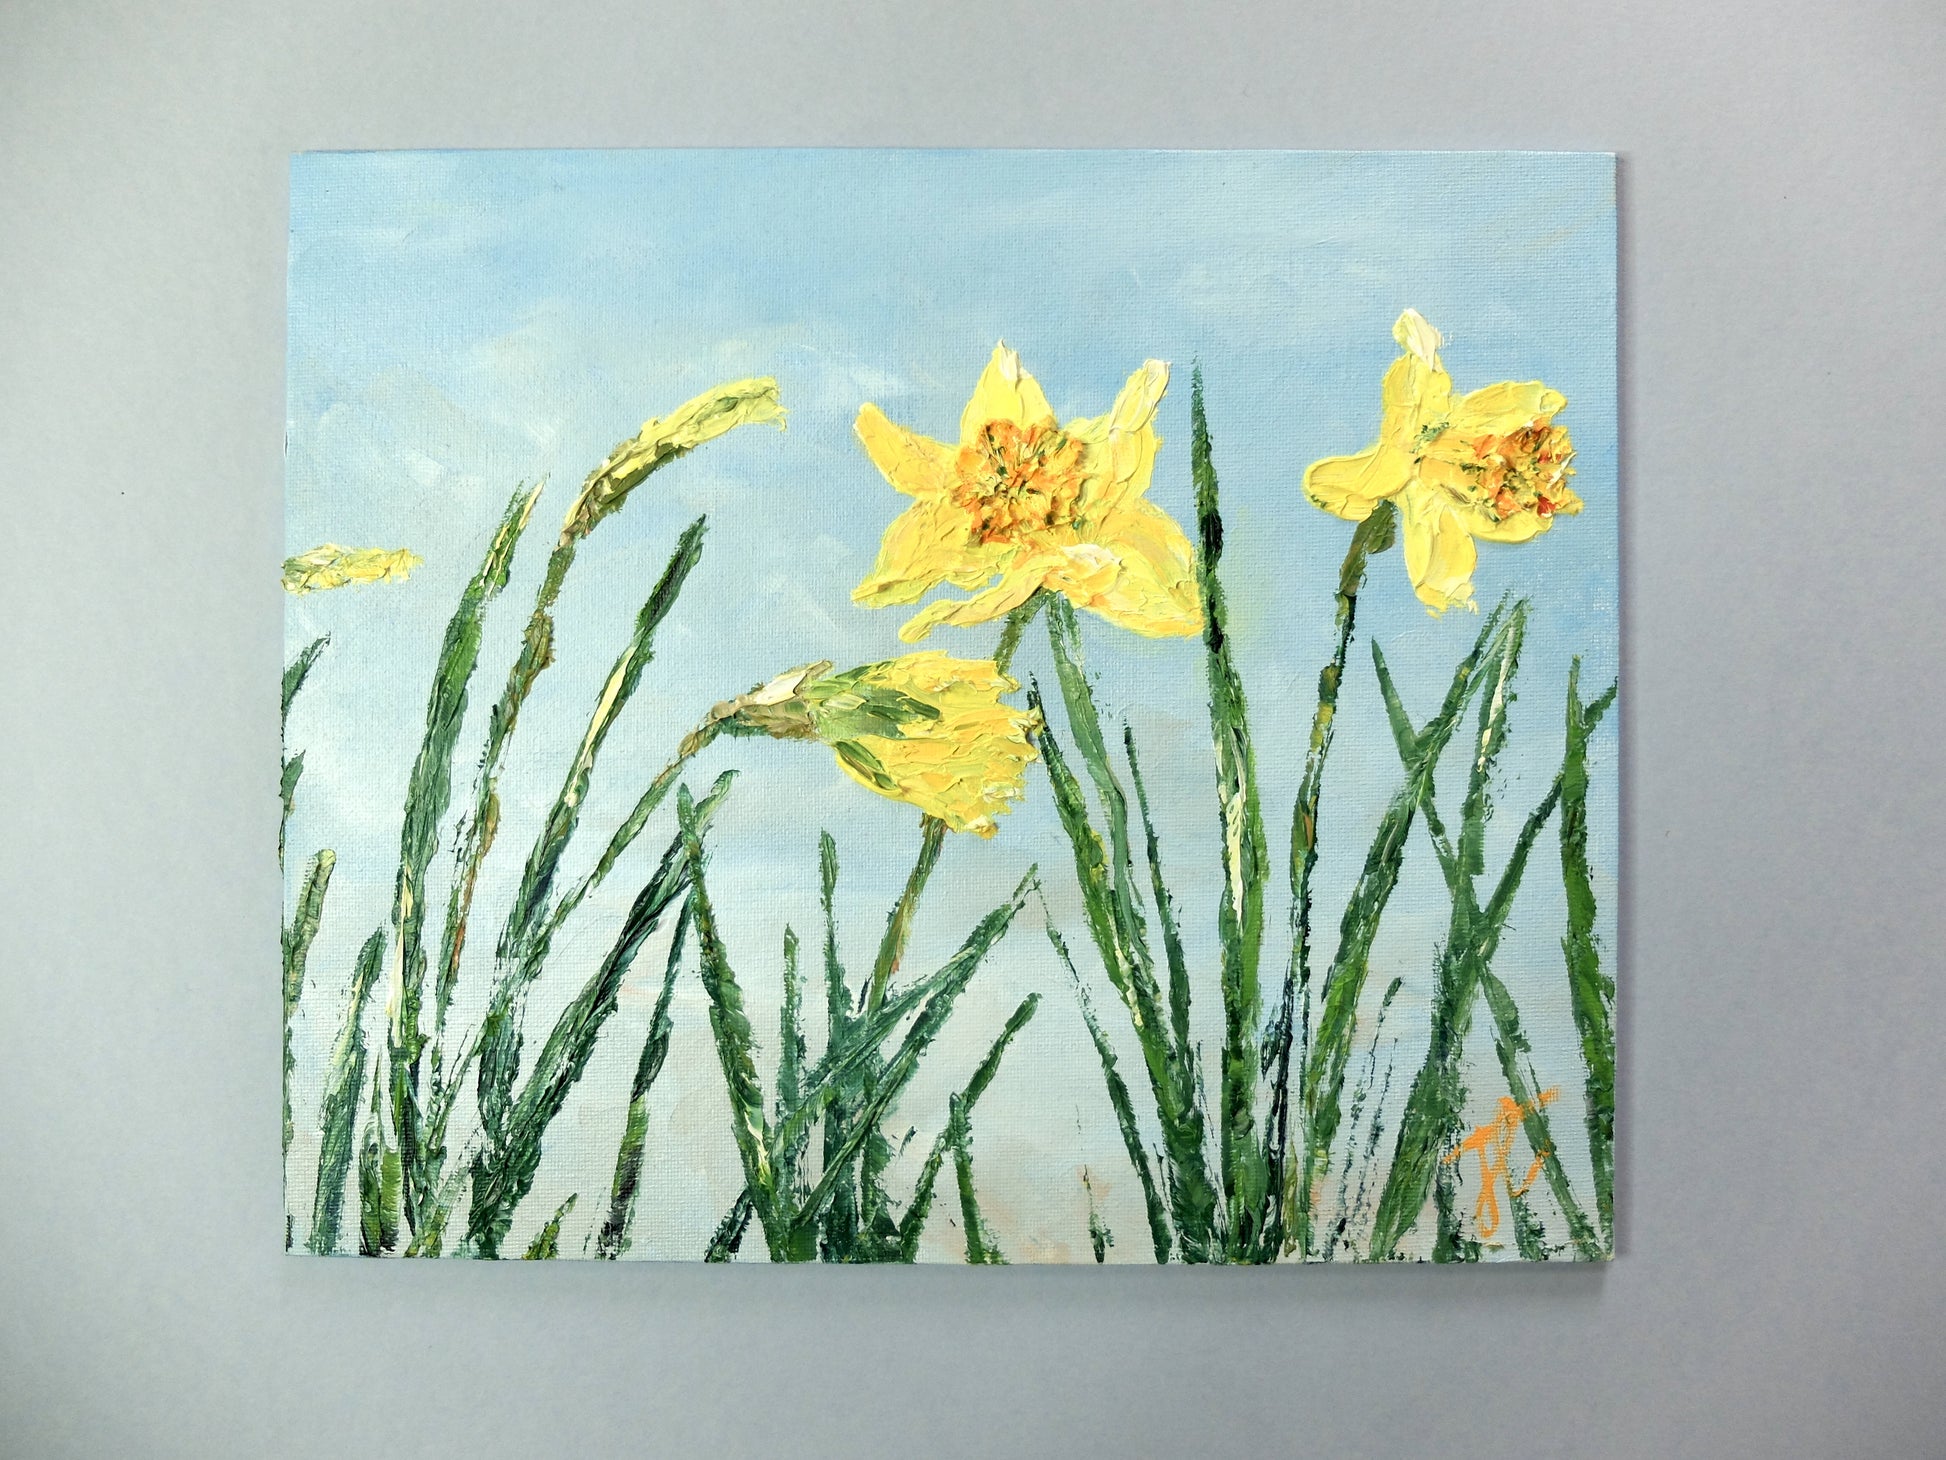 Painting of a row of daffodil plants in bloom, the ones to the left of the painting are in different stages of bud and the two to the right are fully open. The background is a blue sky with soft hints of cloud. The painting has a textured surface where the daffodils are. It is photographed against a grey background